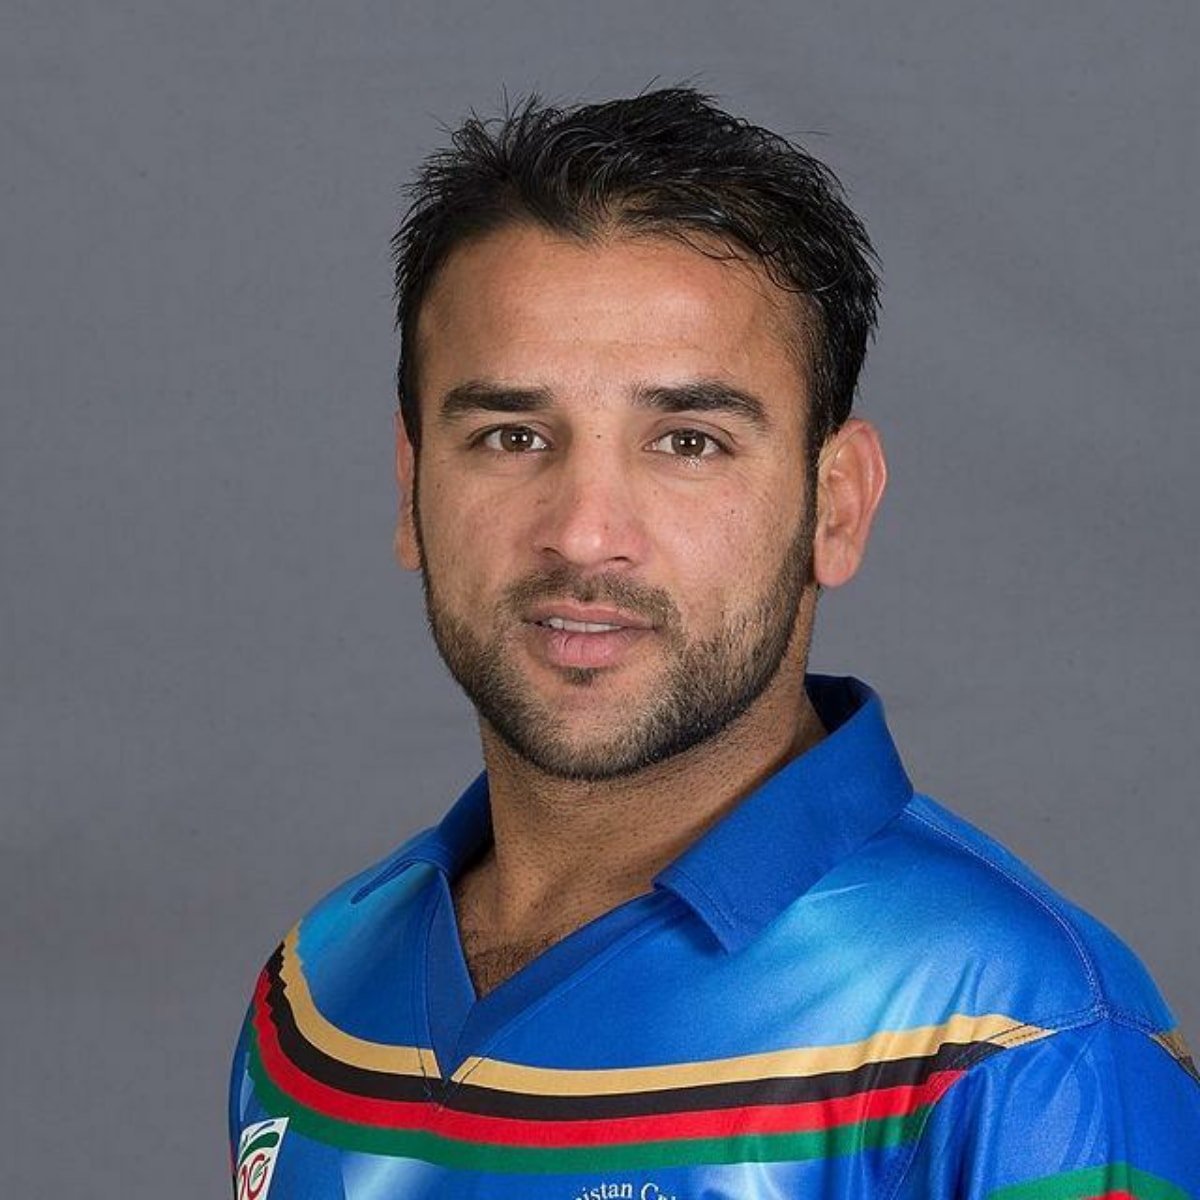 Afghanistan player Shafiqullah Shafiq has been banned for 6 years for Corruption